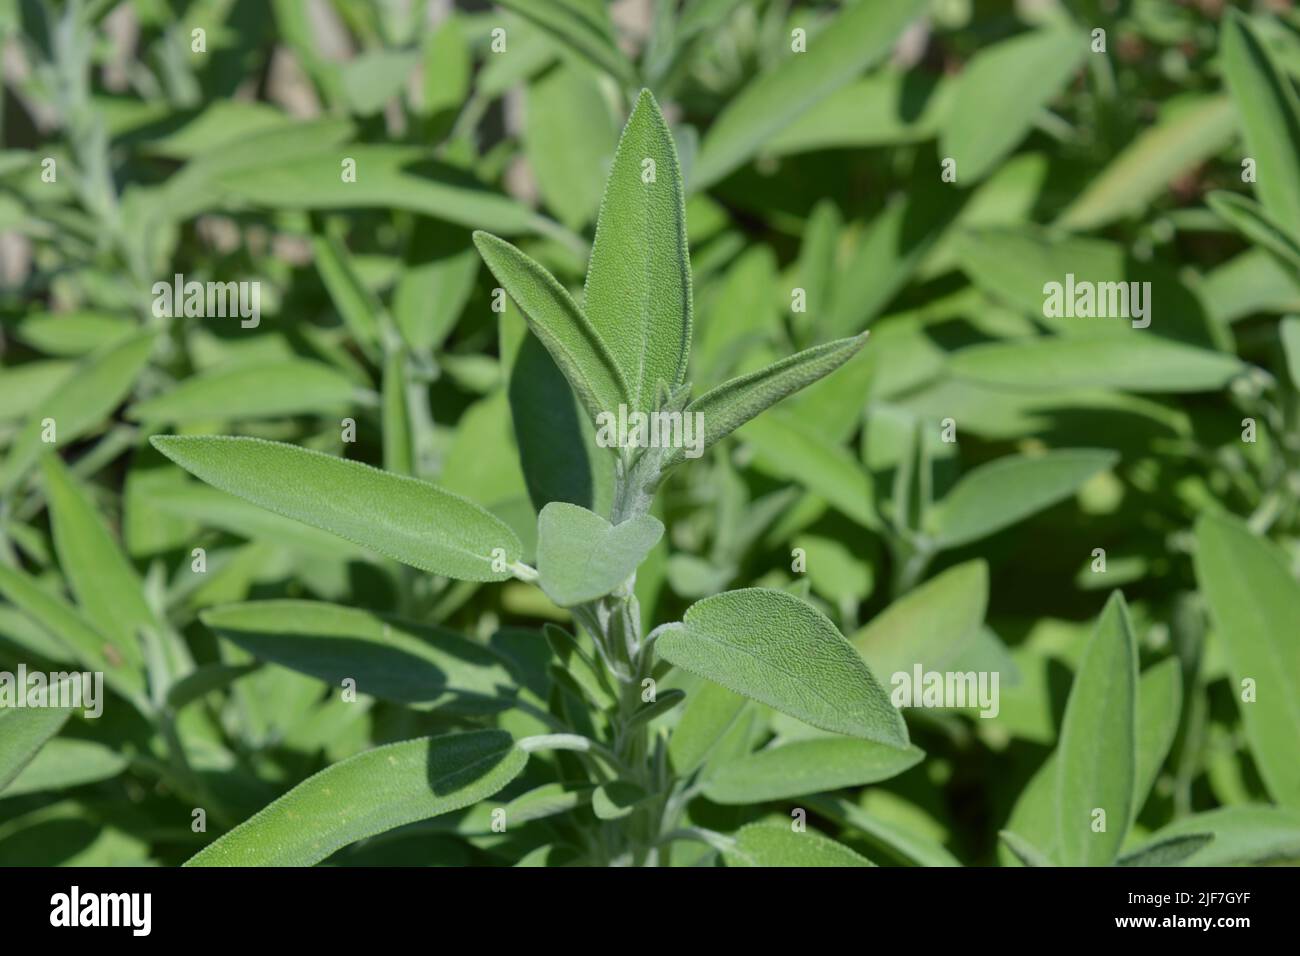 Common sage, Salvia officinalis, a culinary herb, selective focus on fresh green new growth Stock Photo